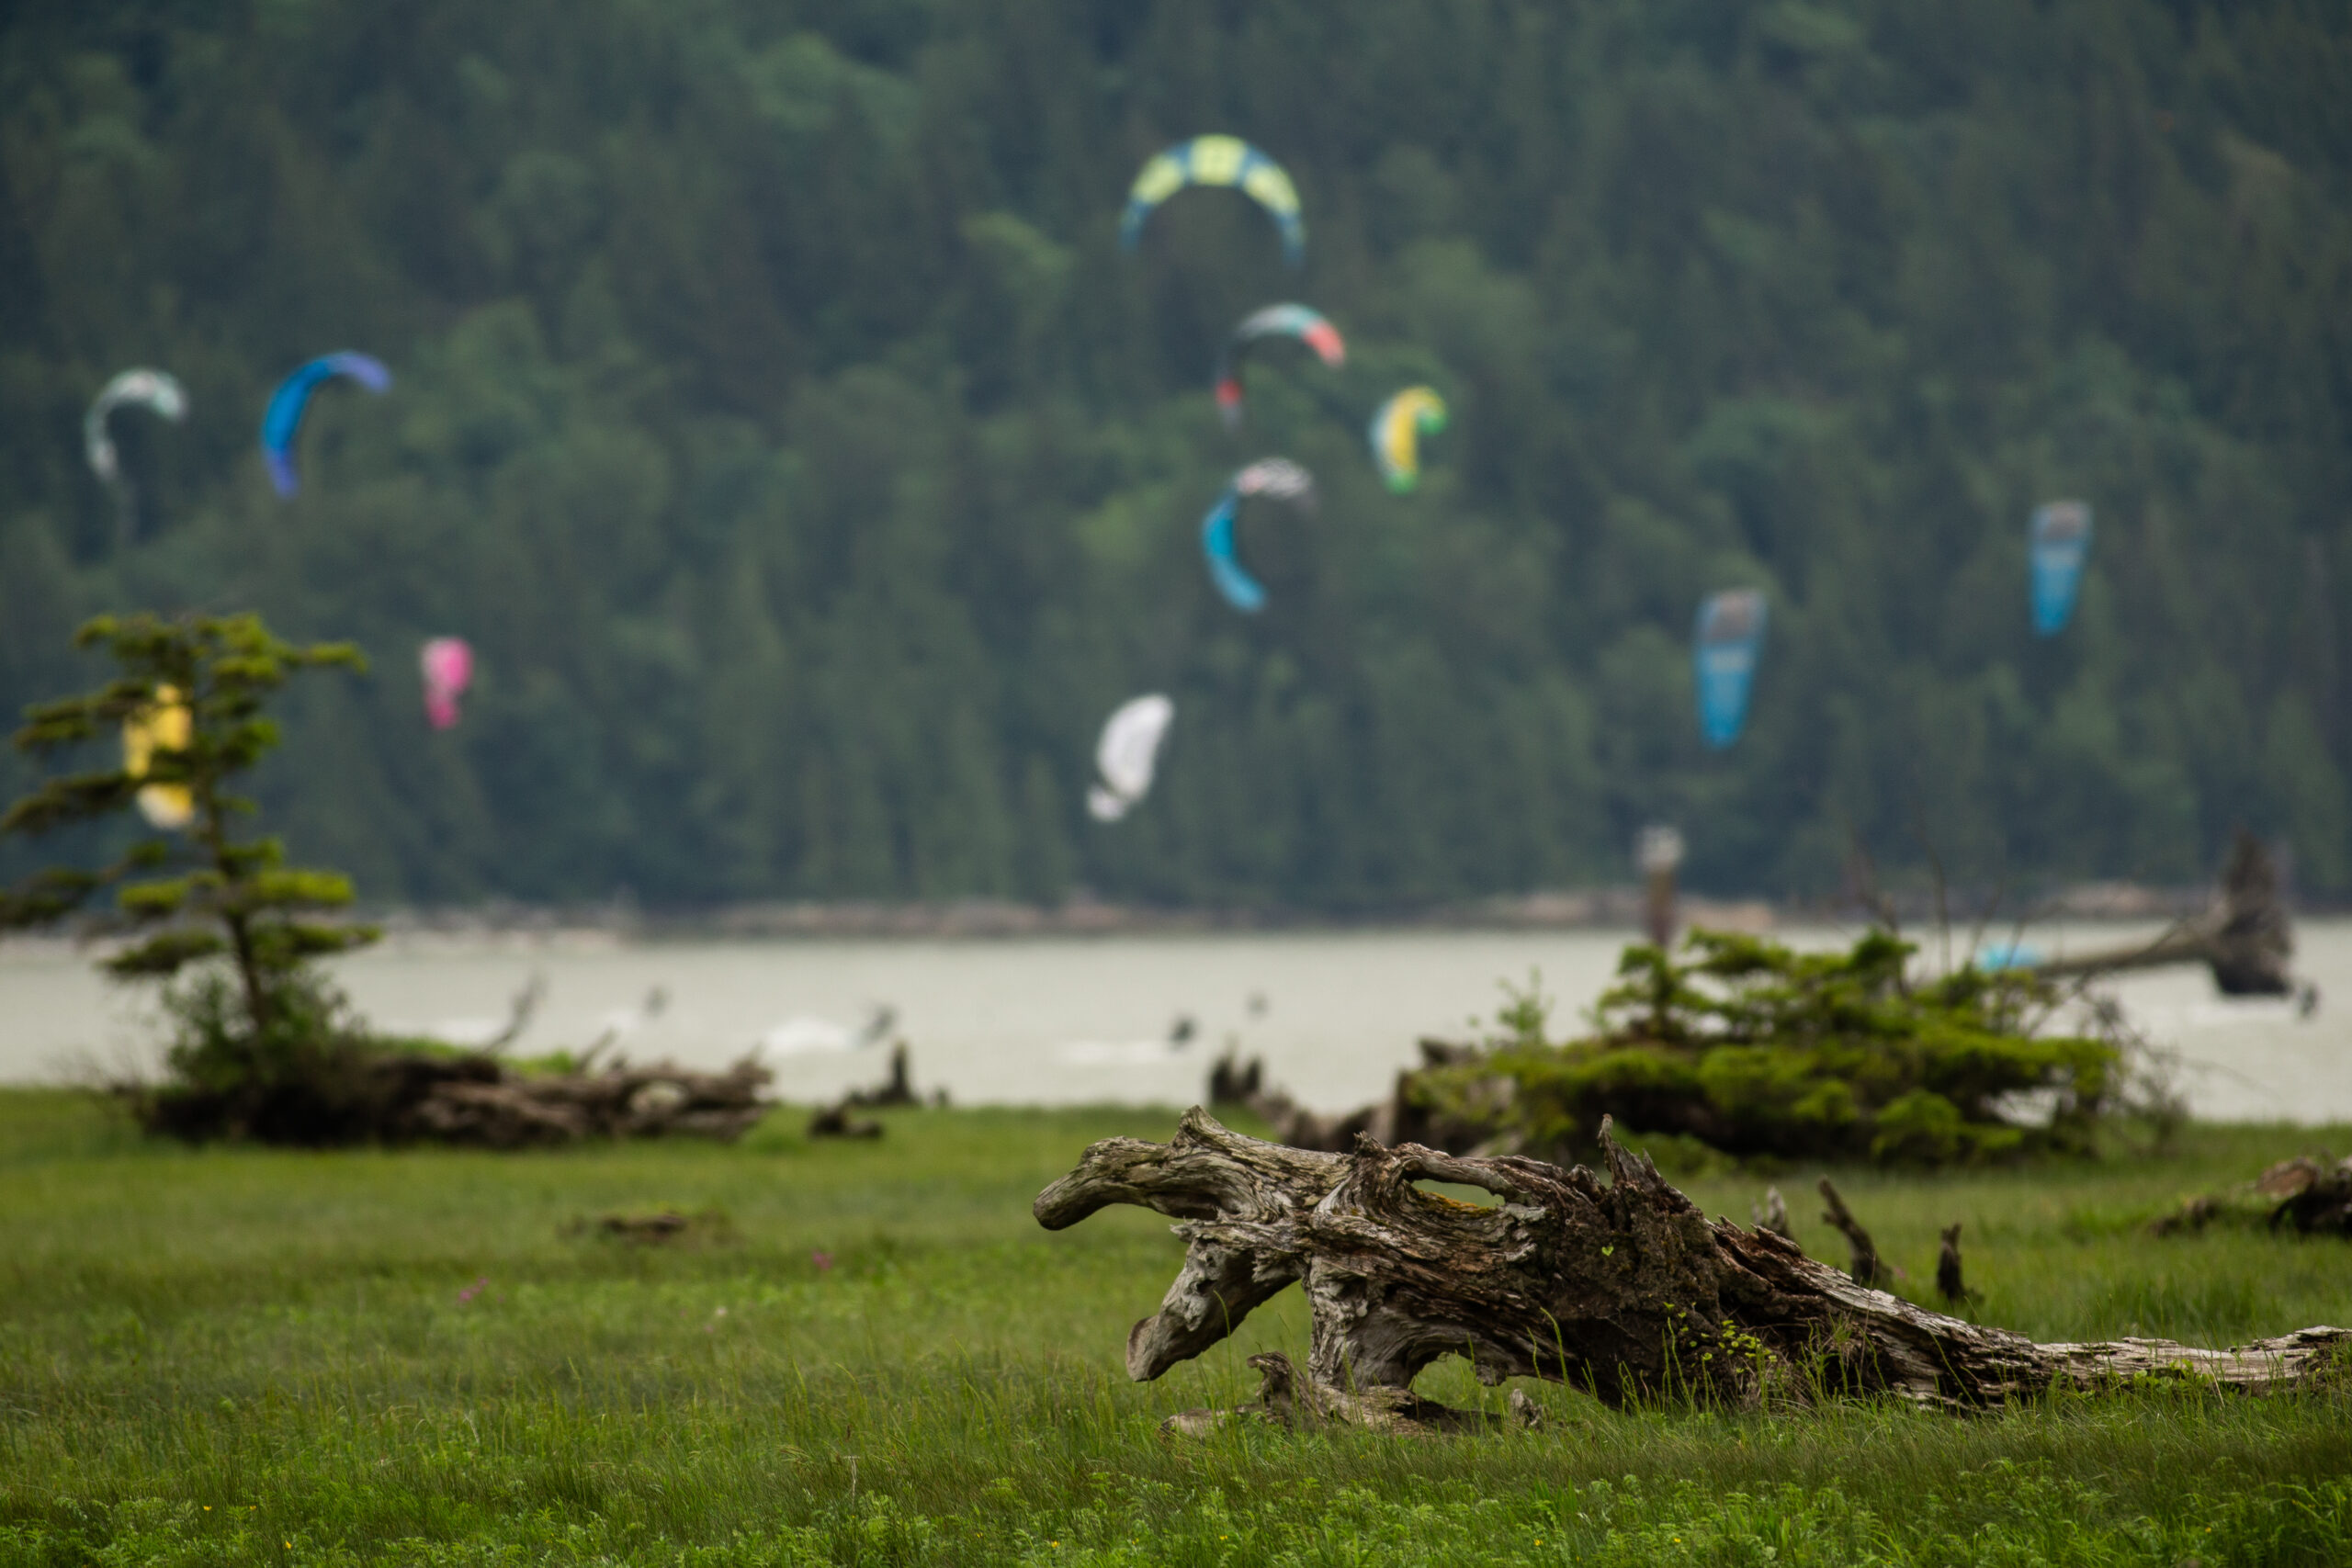 Squamish estuary: Wind surfing kites are seen on Howe Sound in the background overlooking the Squamish Estuary 